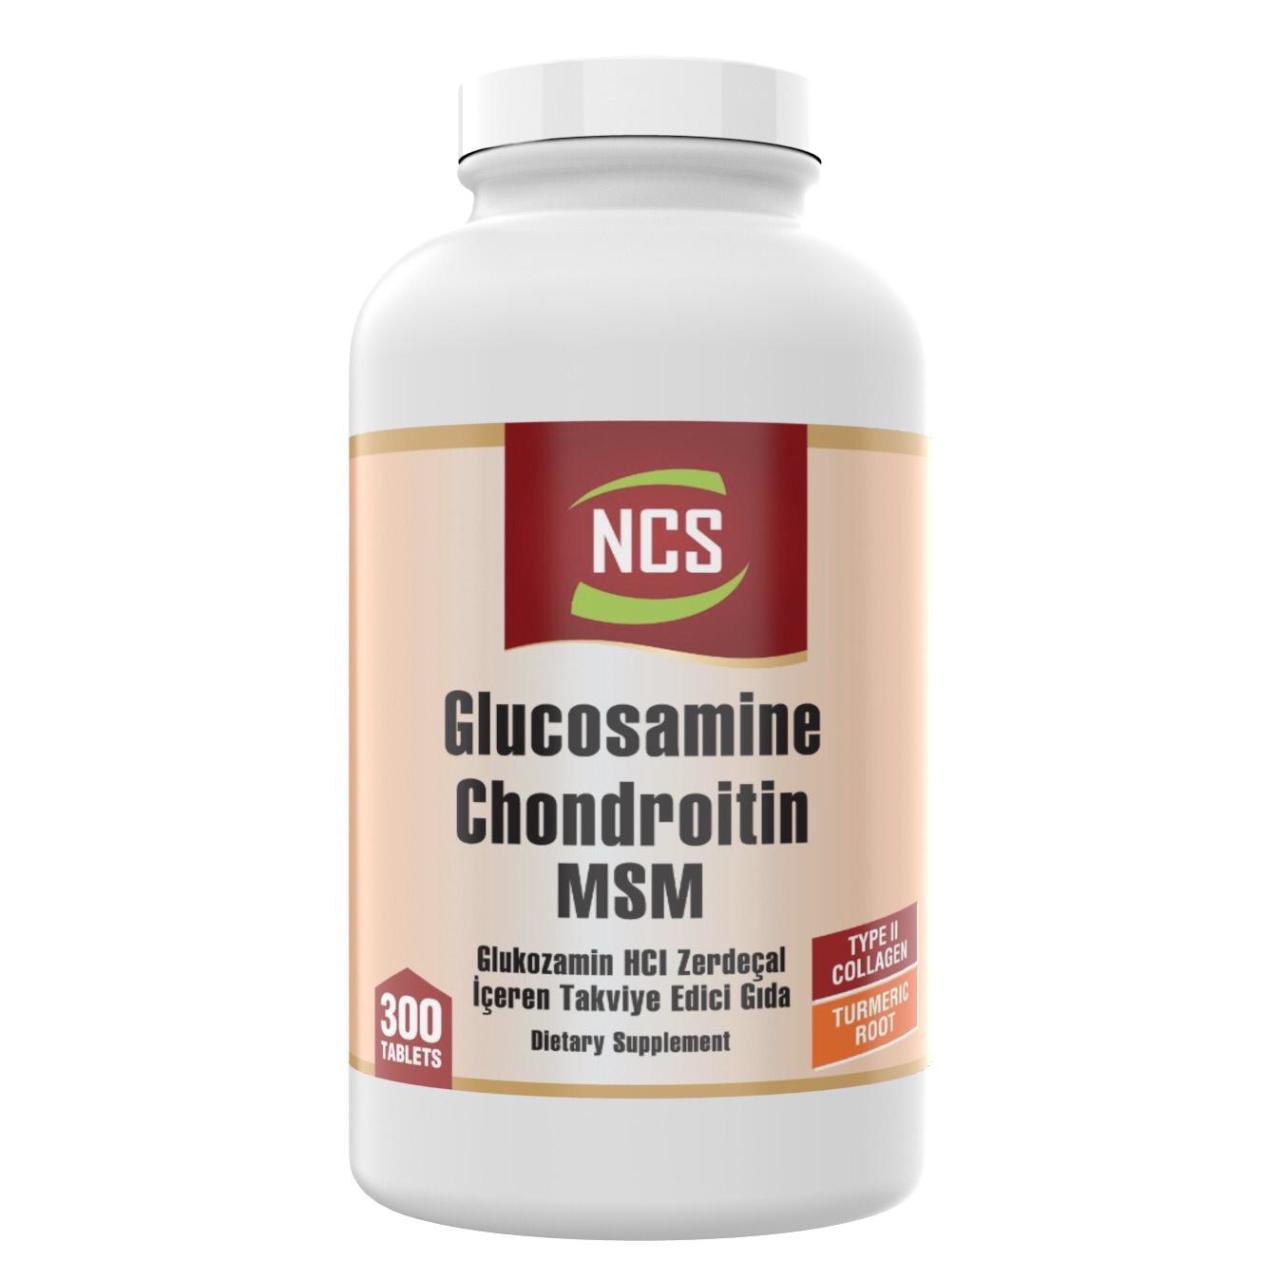 Ncs Glucosamine Chondroitin Msm Collagen Turmeric 300 Tablet